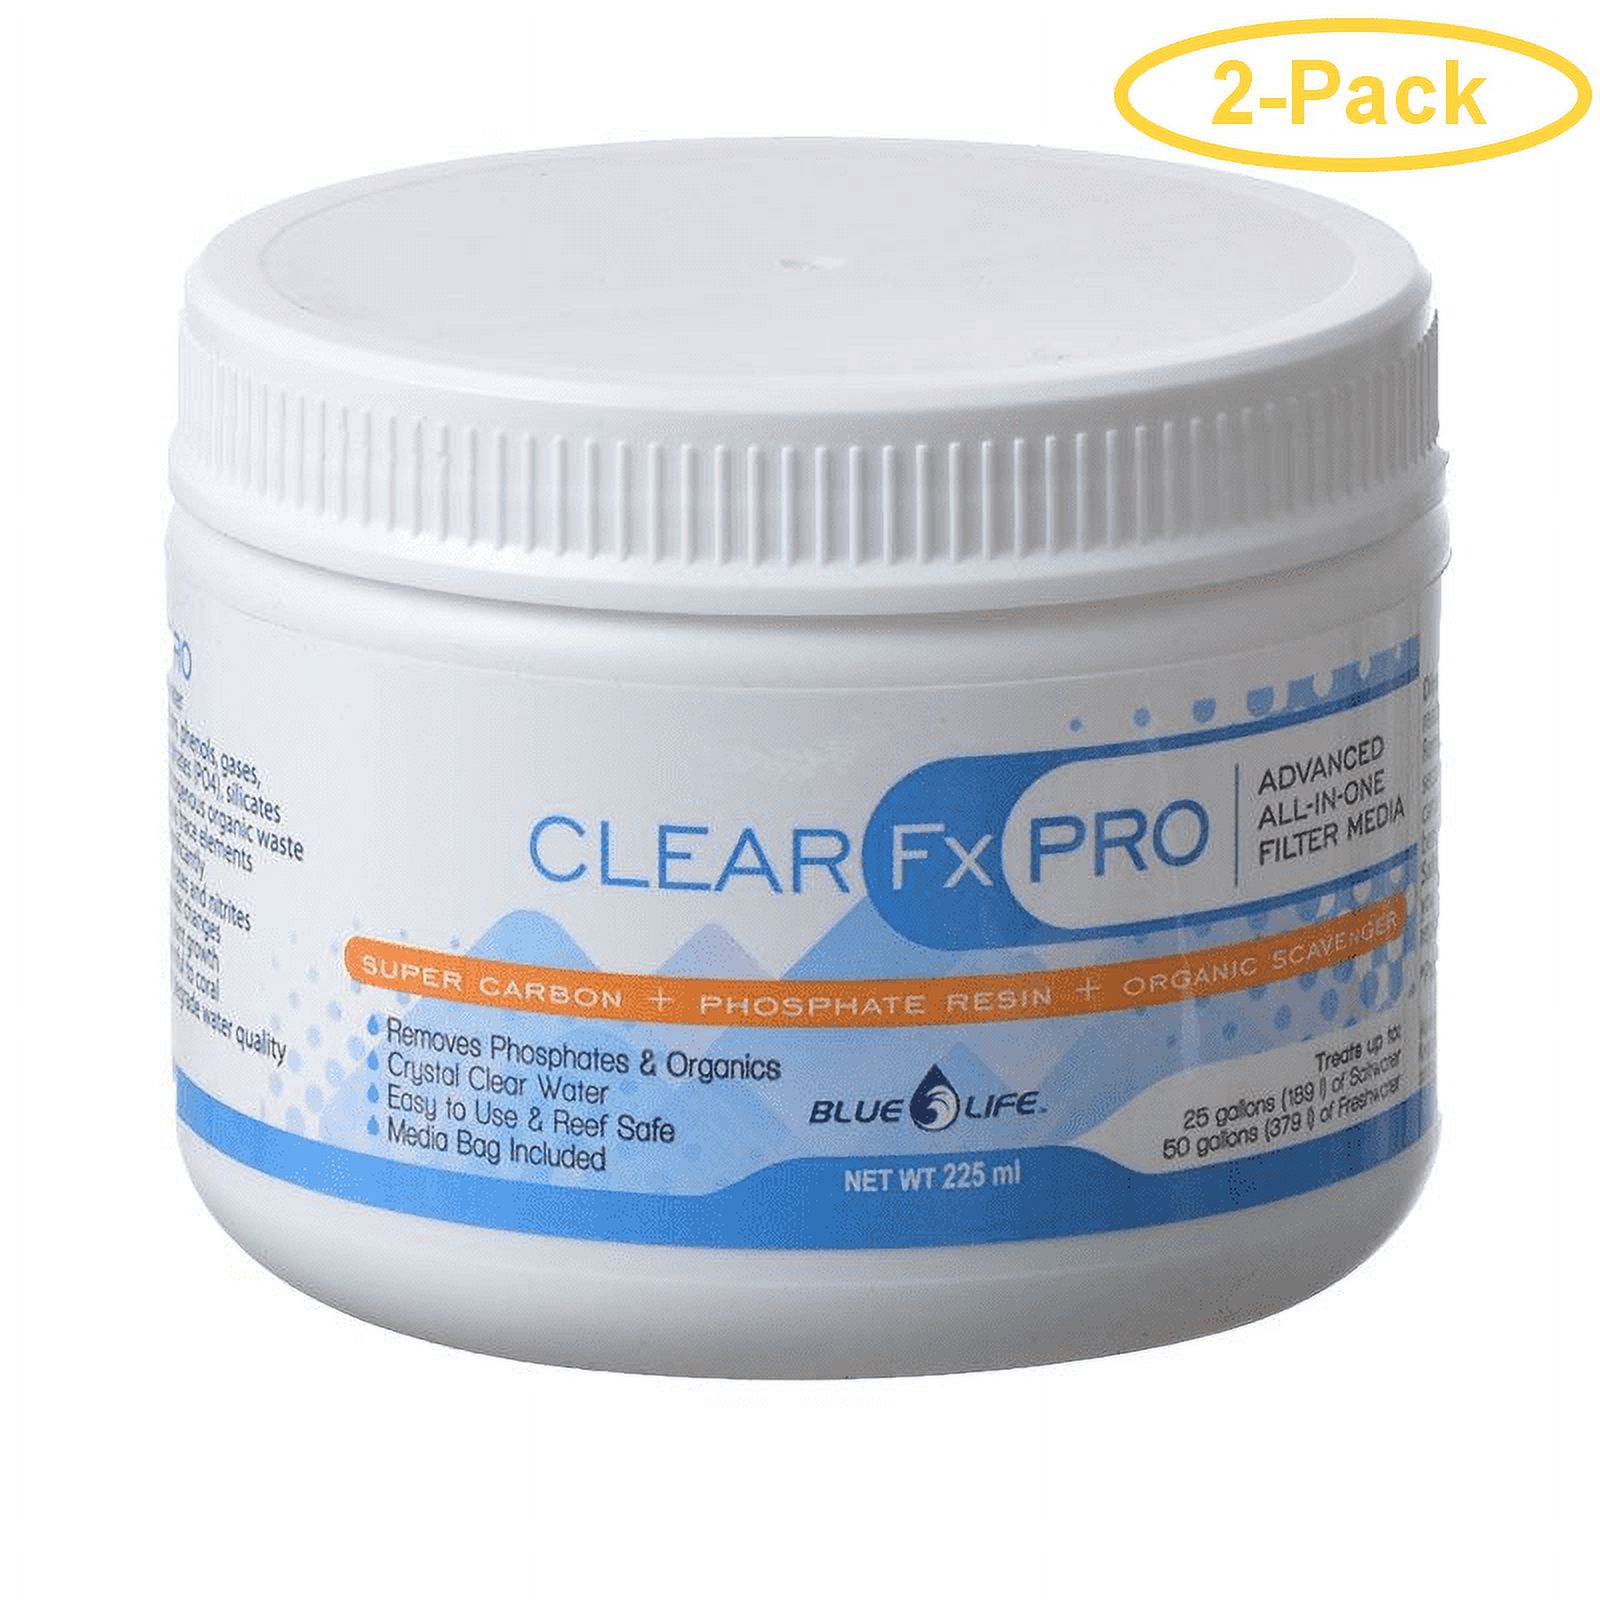 Blue Life Clear FX Pro Filter Media 225 ml - Pack of 2 - image 1 of 1